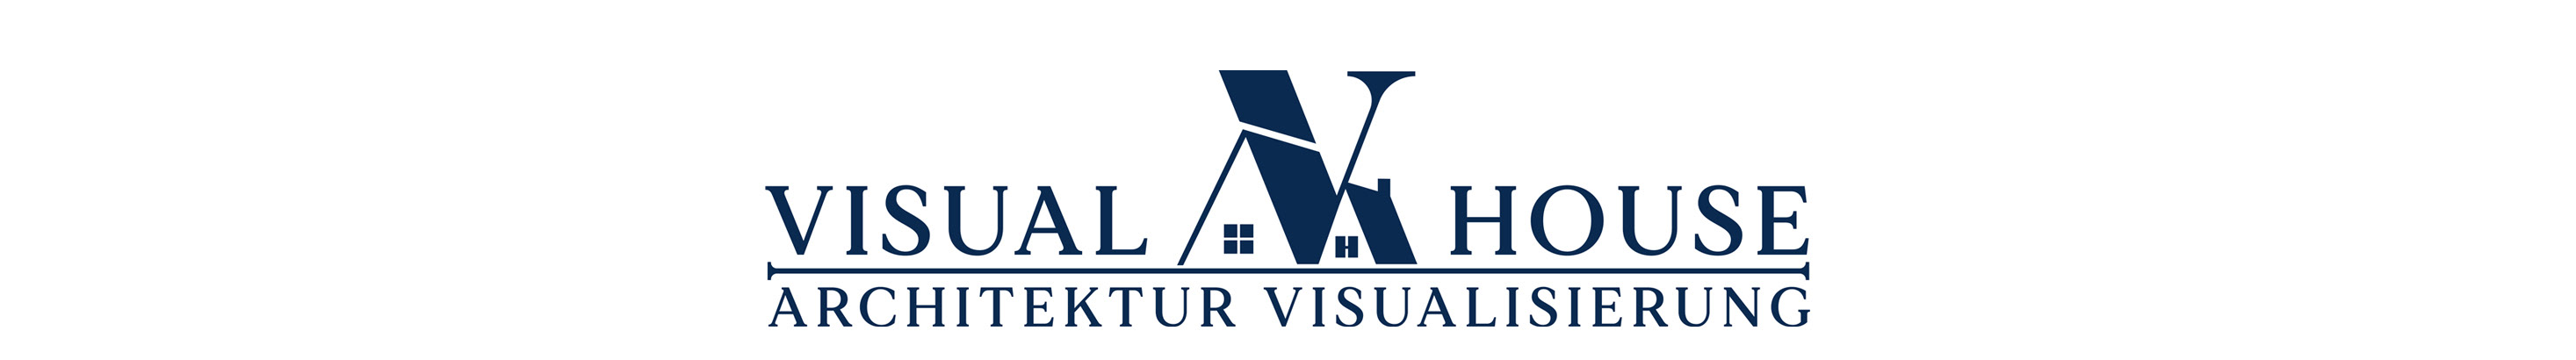 Visual House Germany's profile banner